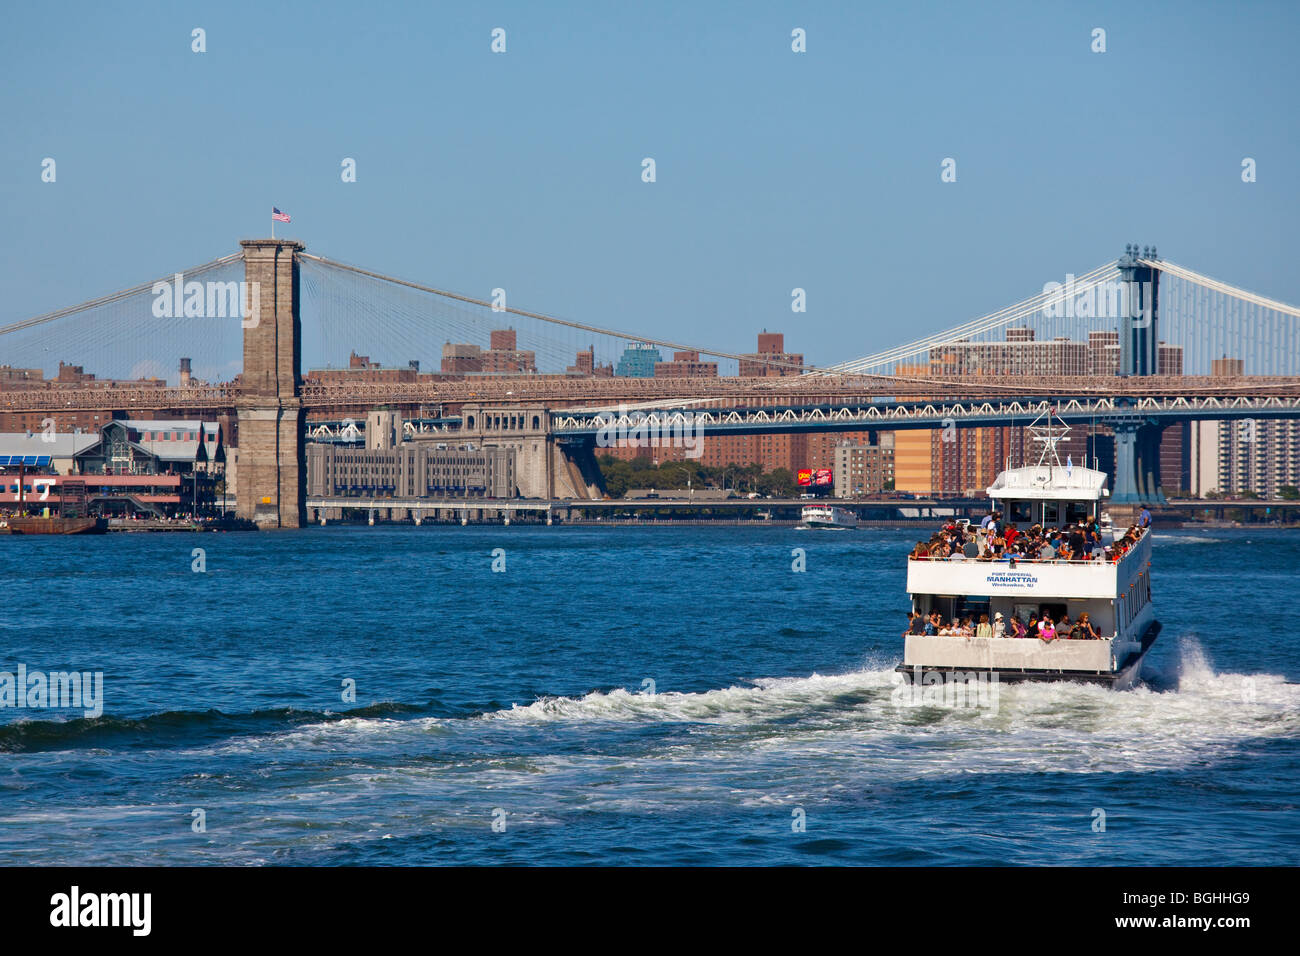 Tourists on a boat tour in the East River in New York City Stock Photo